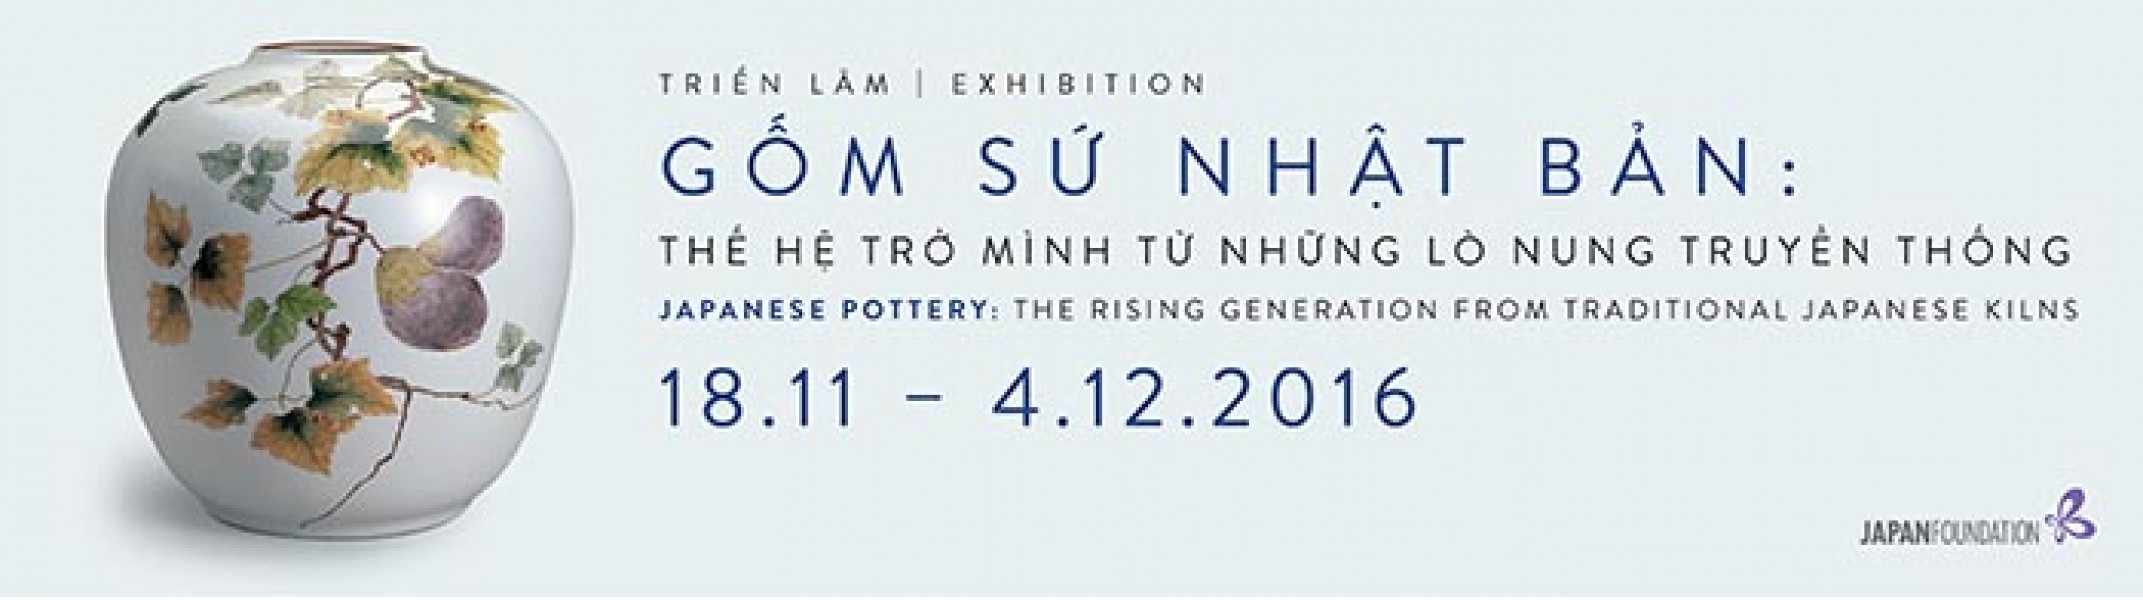 exhibition-japanese-pottery-the-rising-generation-from-traditional-japanese-hanoi.jpg